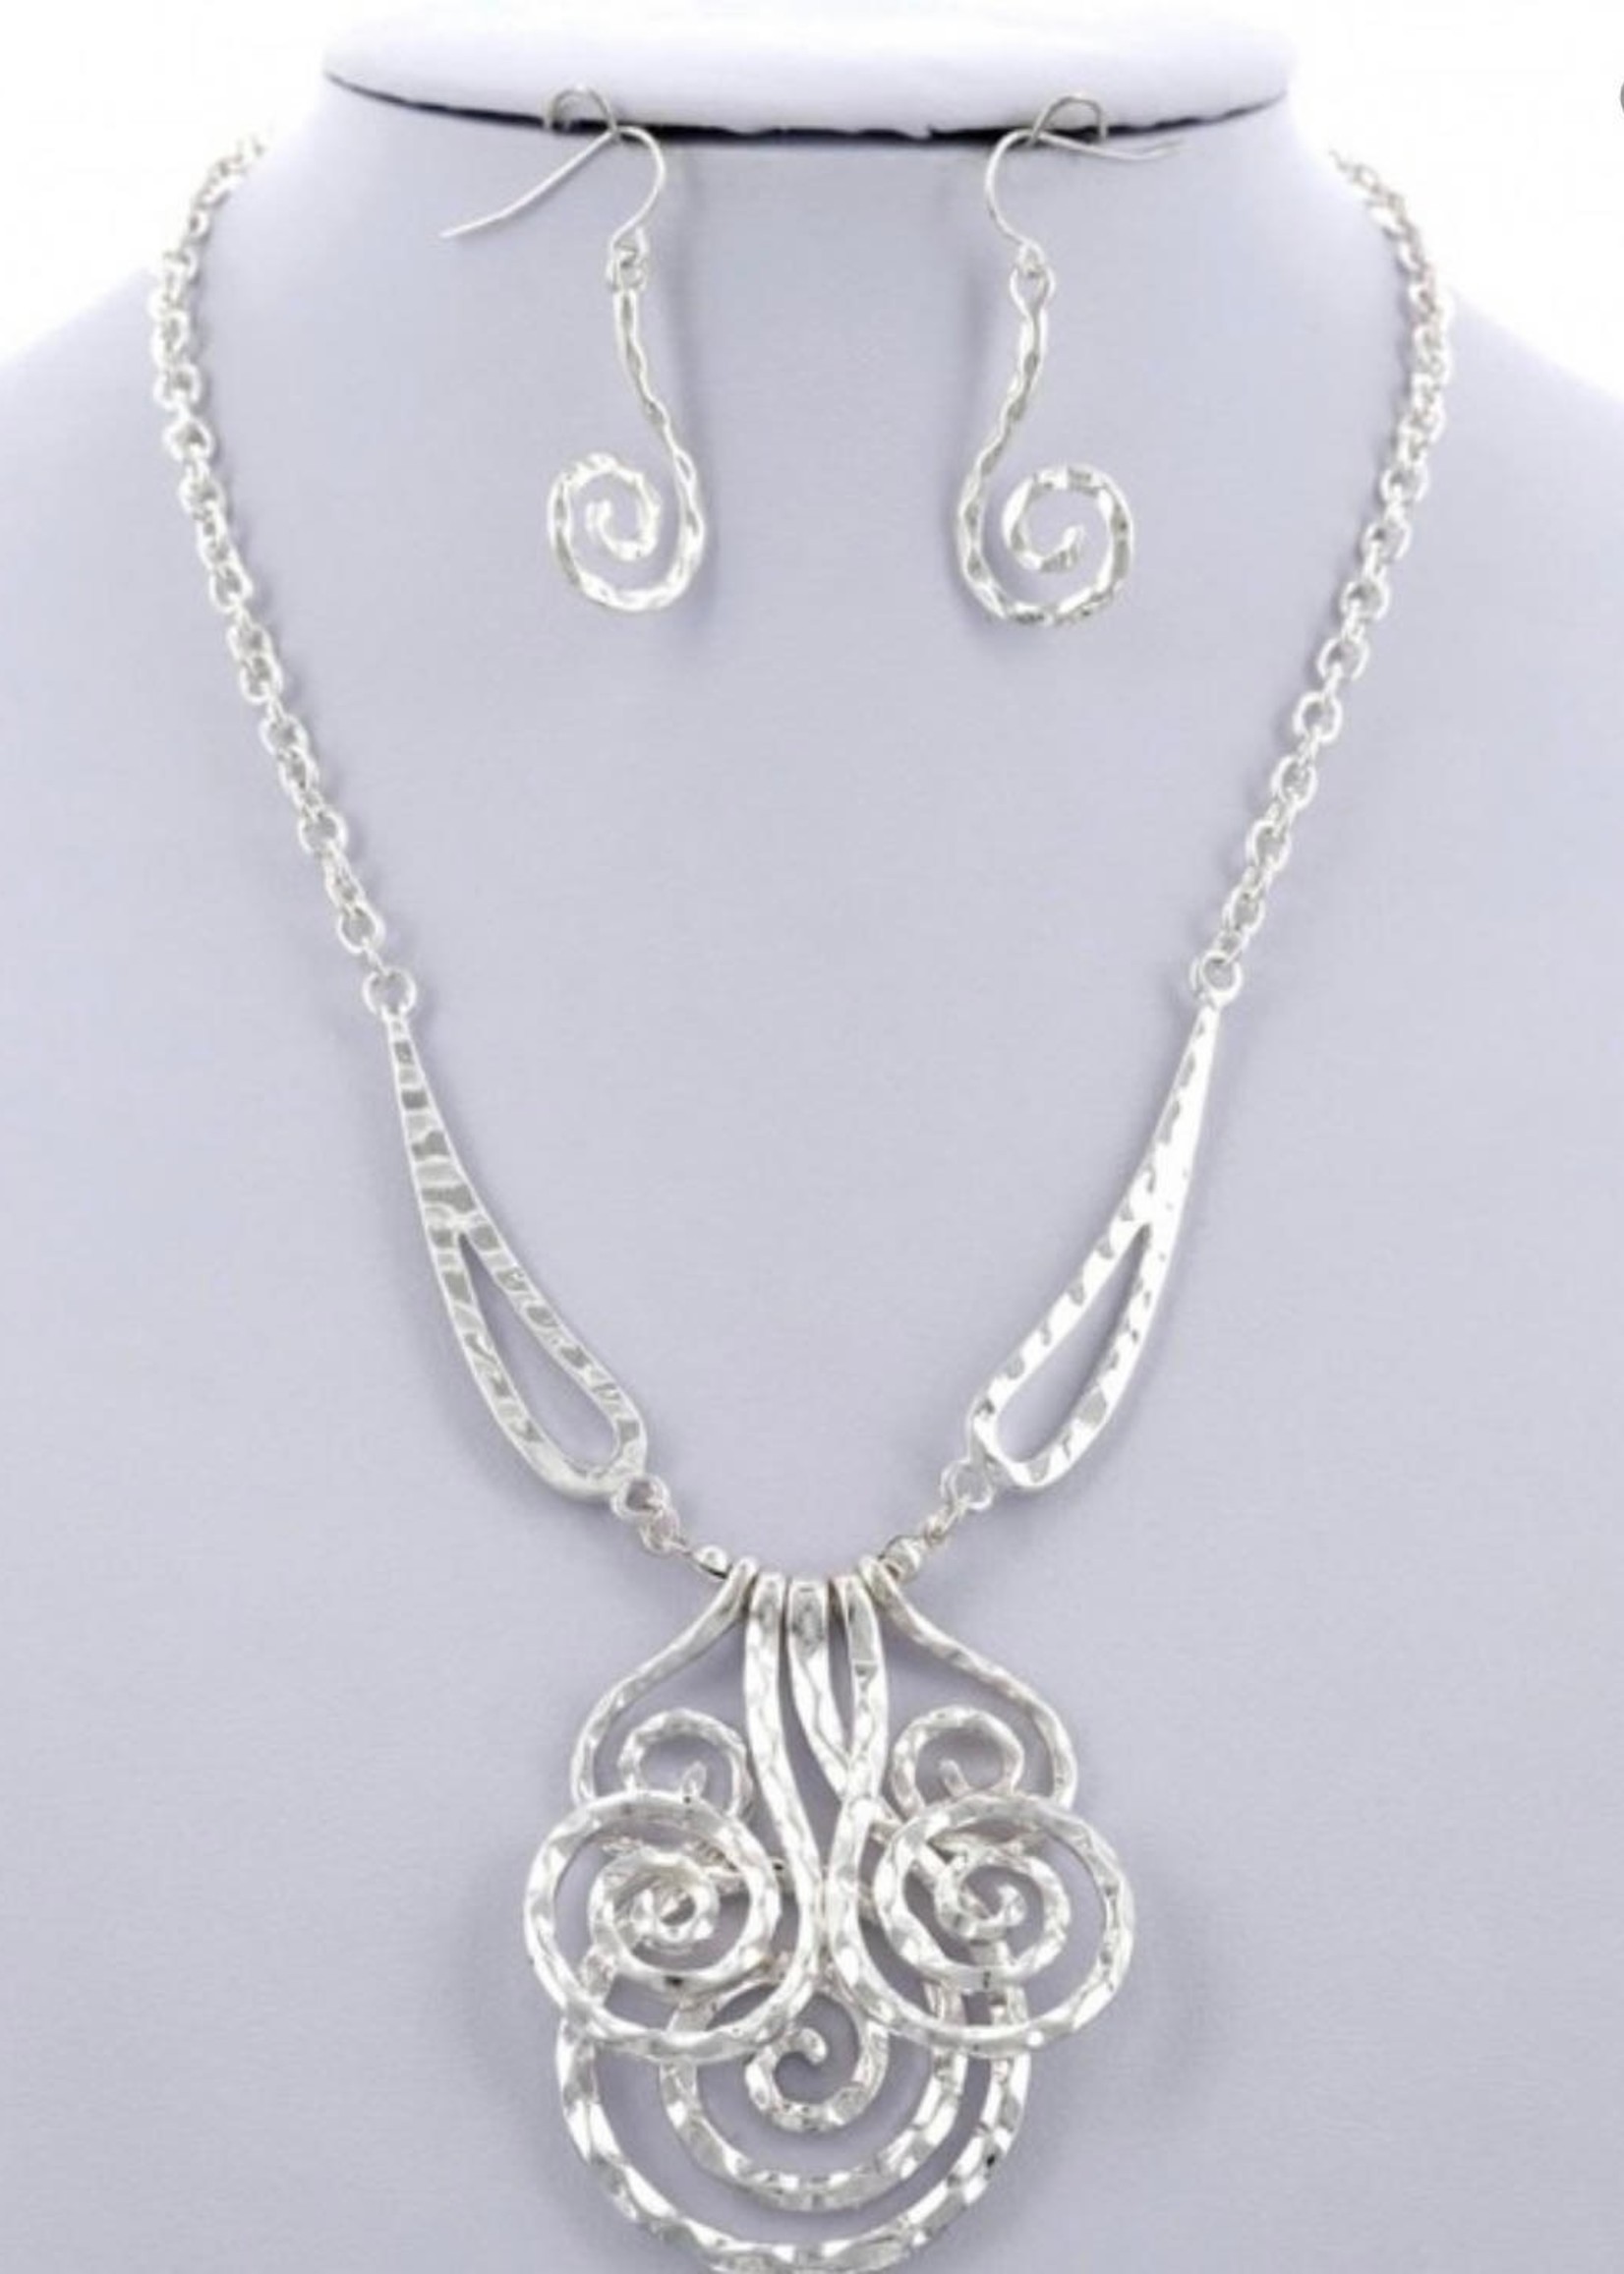 Swirl design necklace and earrings 16-18" silver